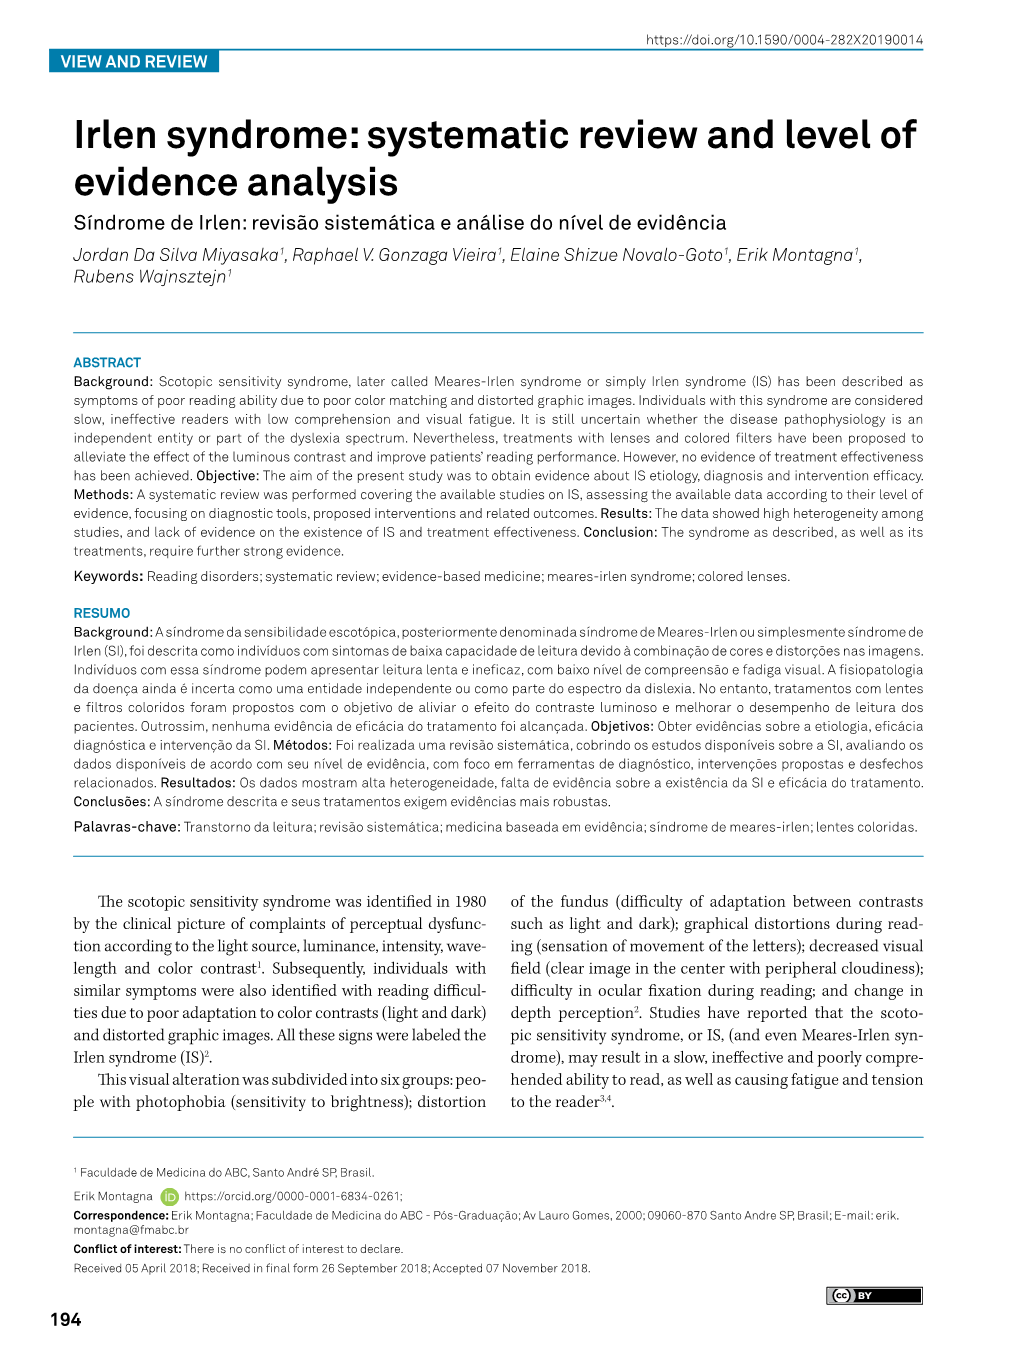 Irlen Syndrome: Systematic Review and Level of Evidence Analysis